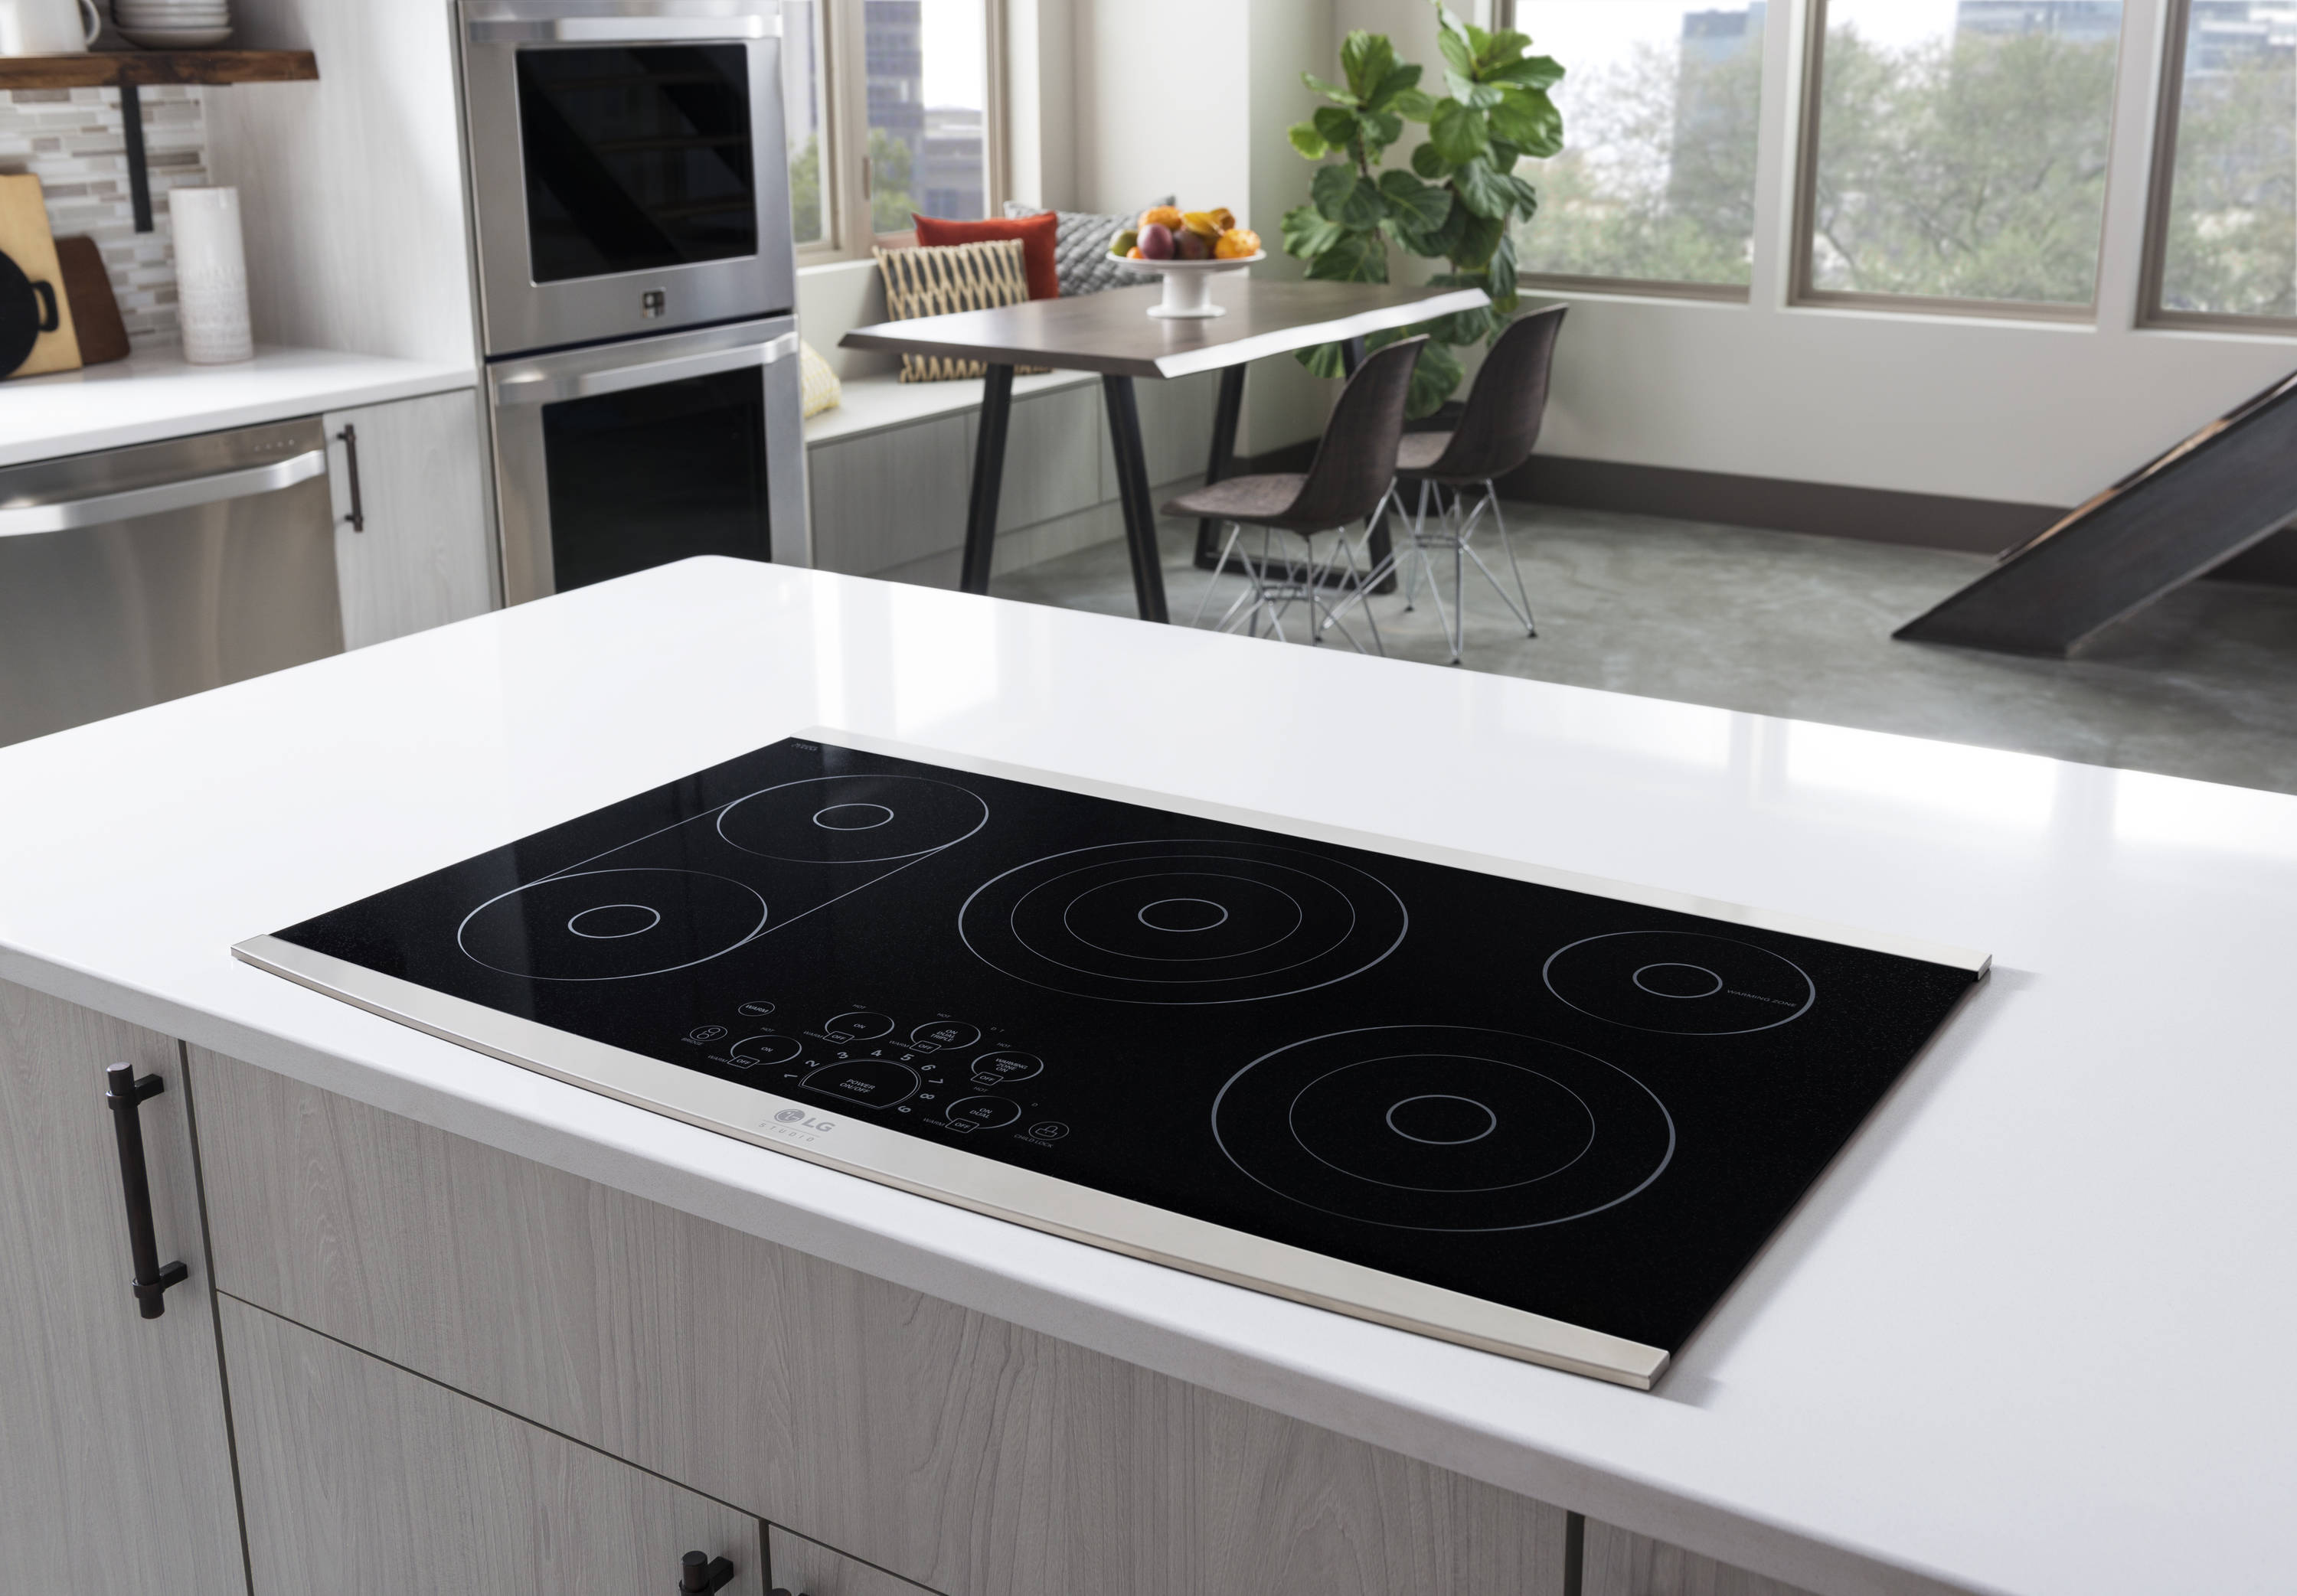 Electric cooktop at Lowe's